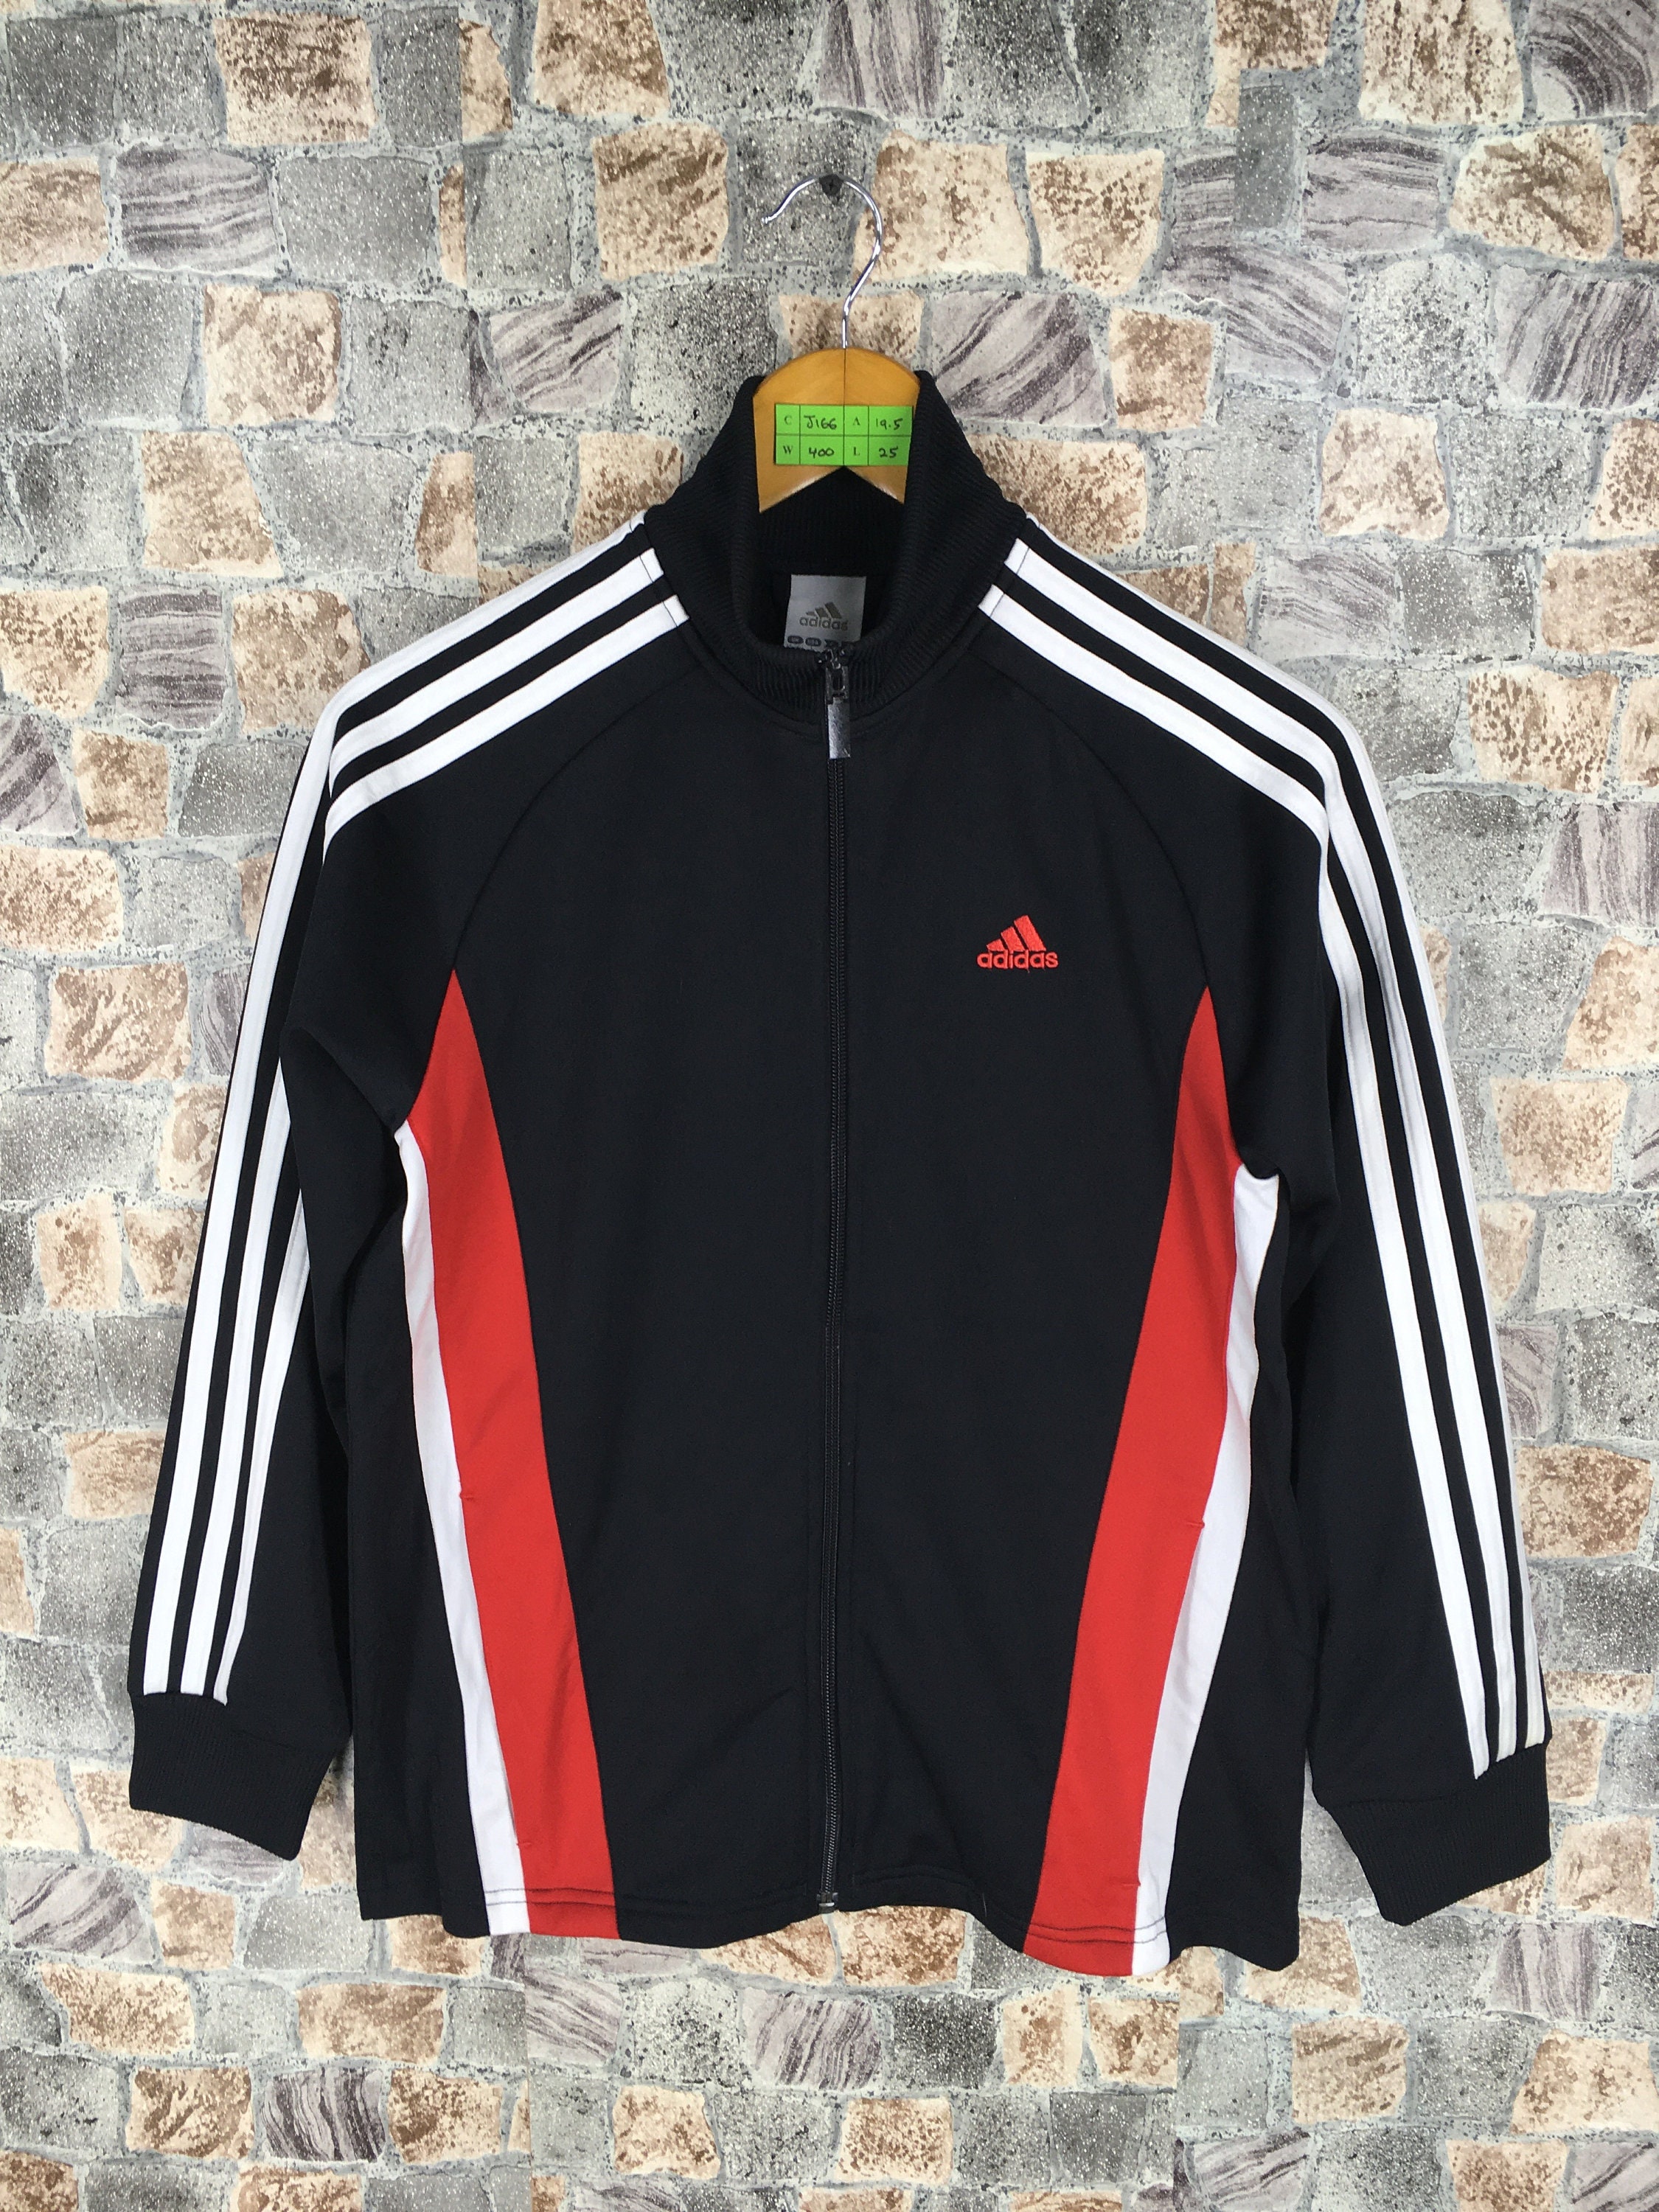 Adidas Track Top Black/Red Jacket Women Small Vintage 90's | Etsy